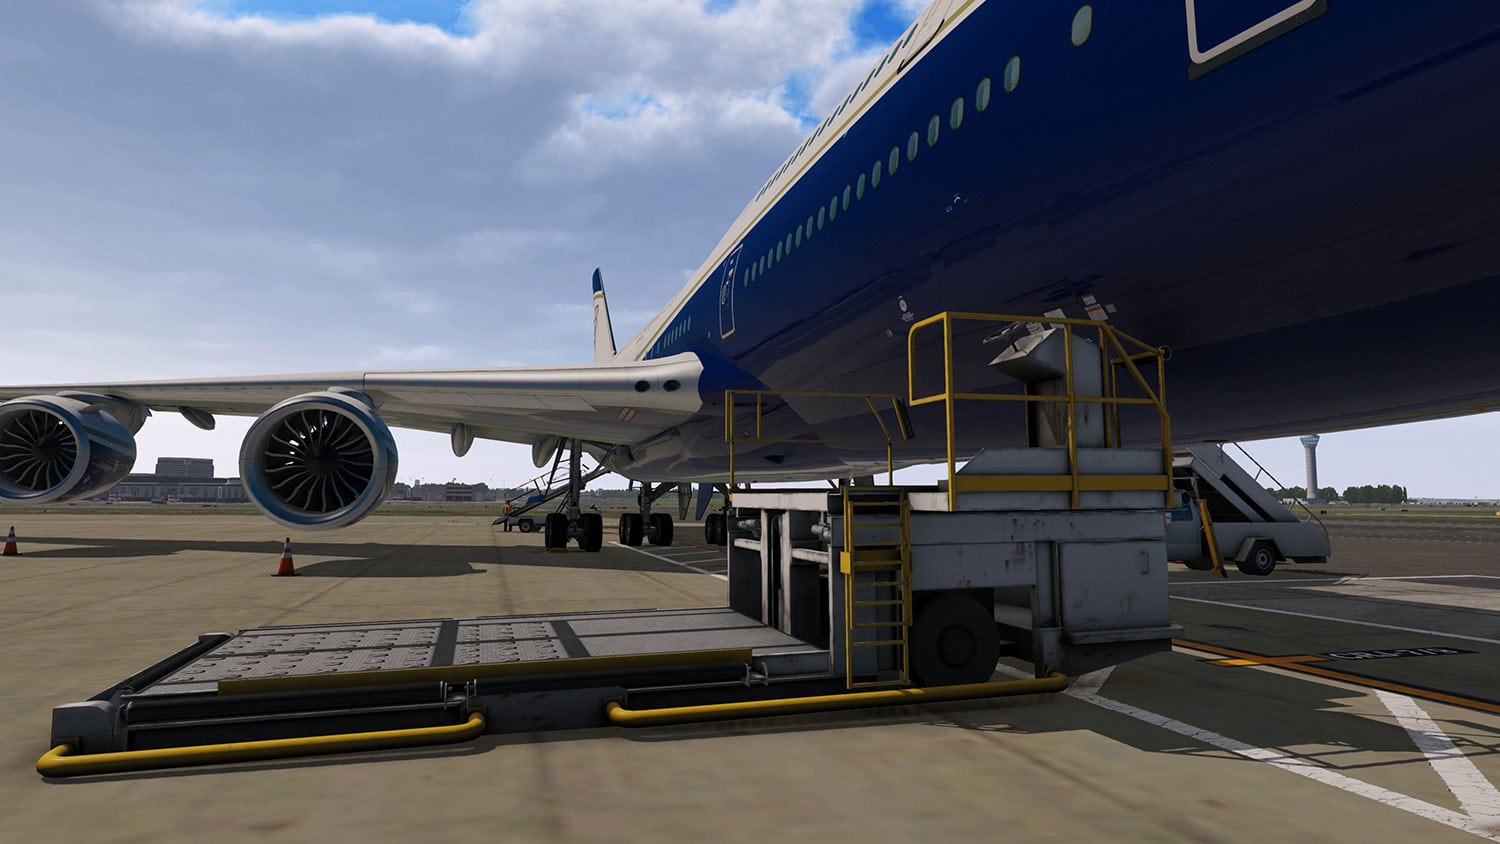 Stairport Sceneries Releases GroundService for X-Plane - Stairport Sceneries, X-Plane